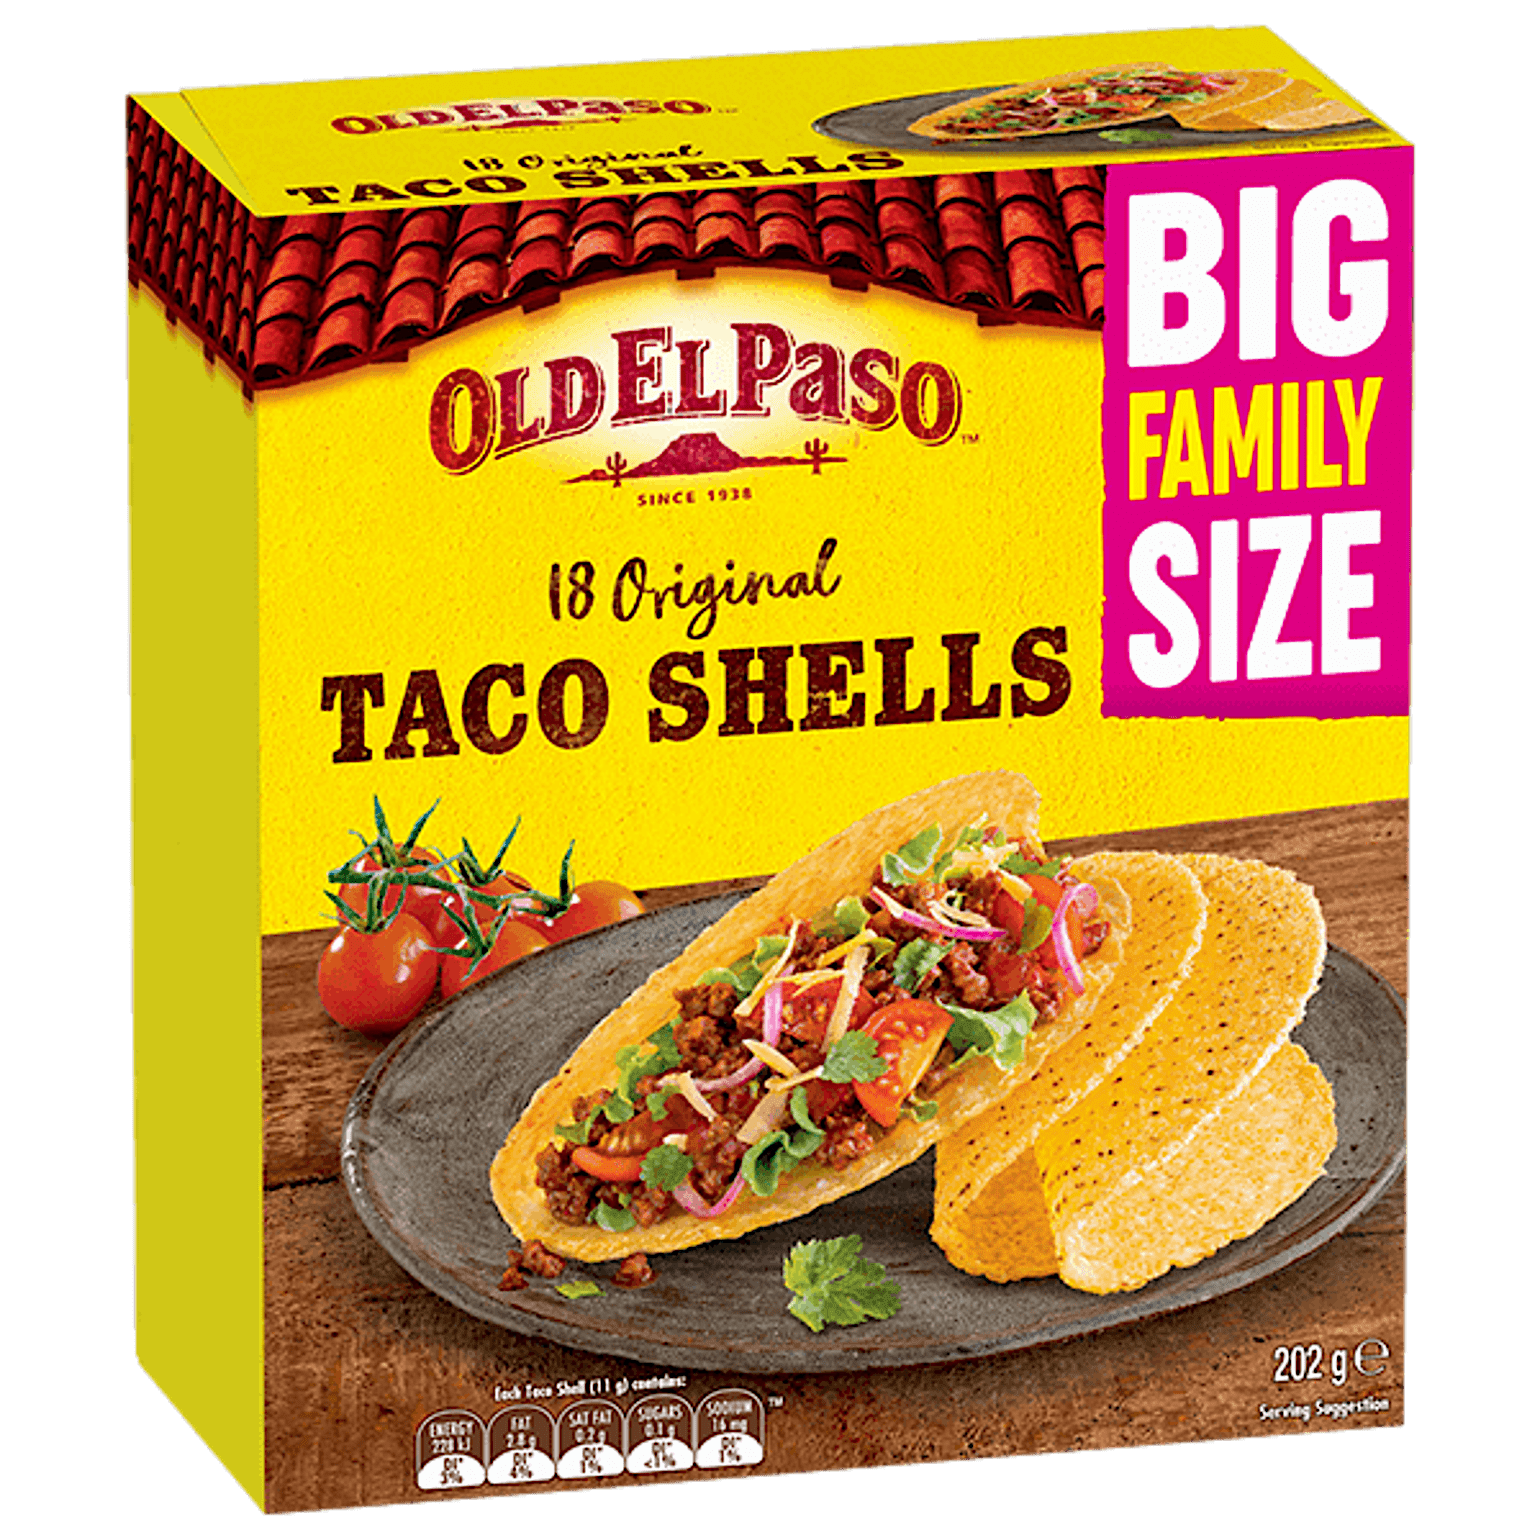 a family size pack of Old El Paso's 18 original taco shells (202g)